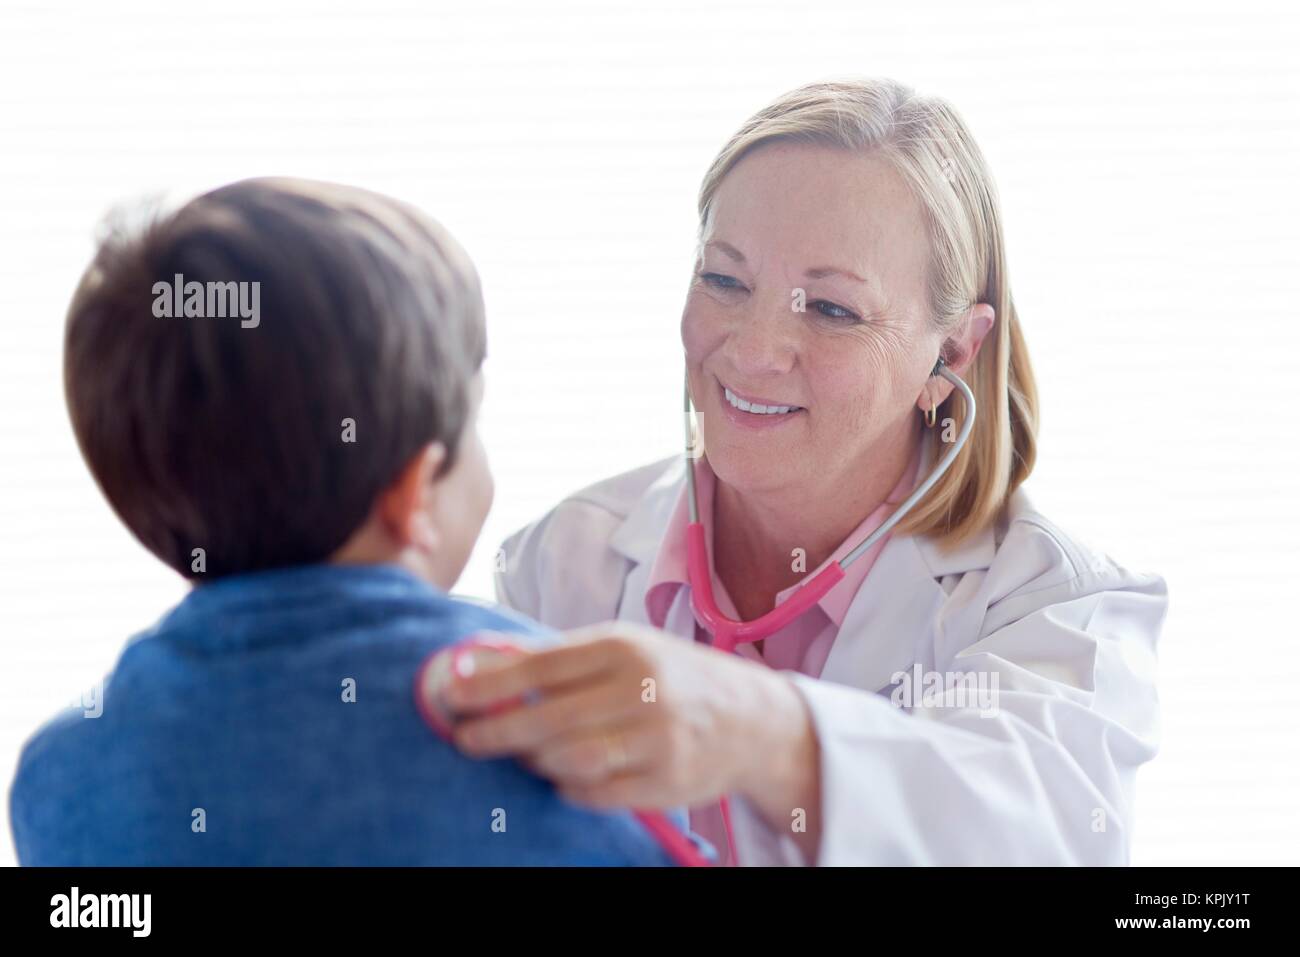 Nurse using stethoscope with young boy. Stock Photo